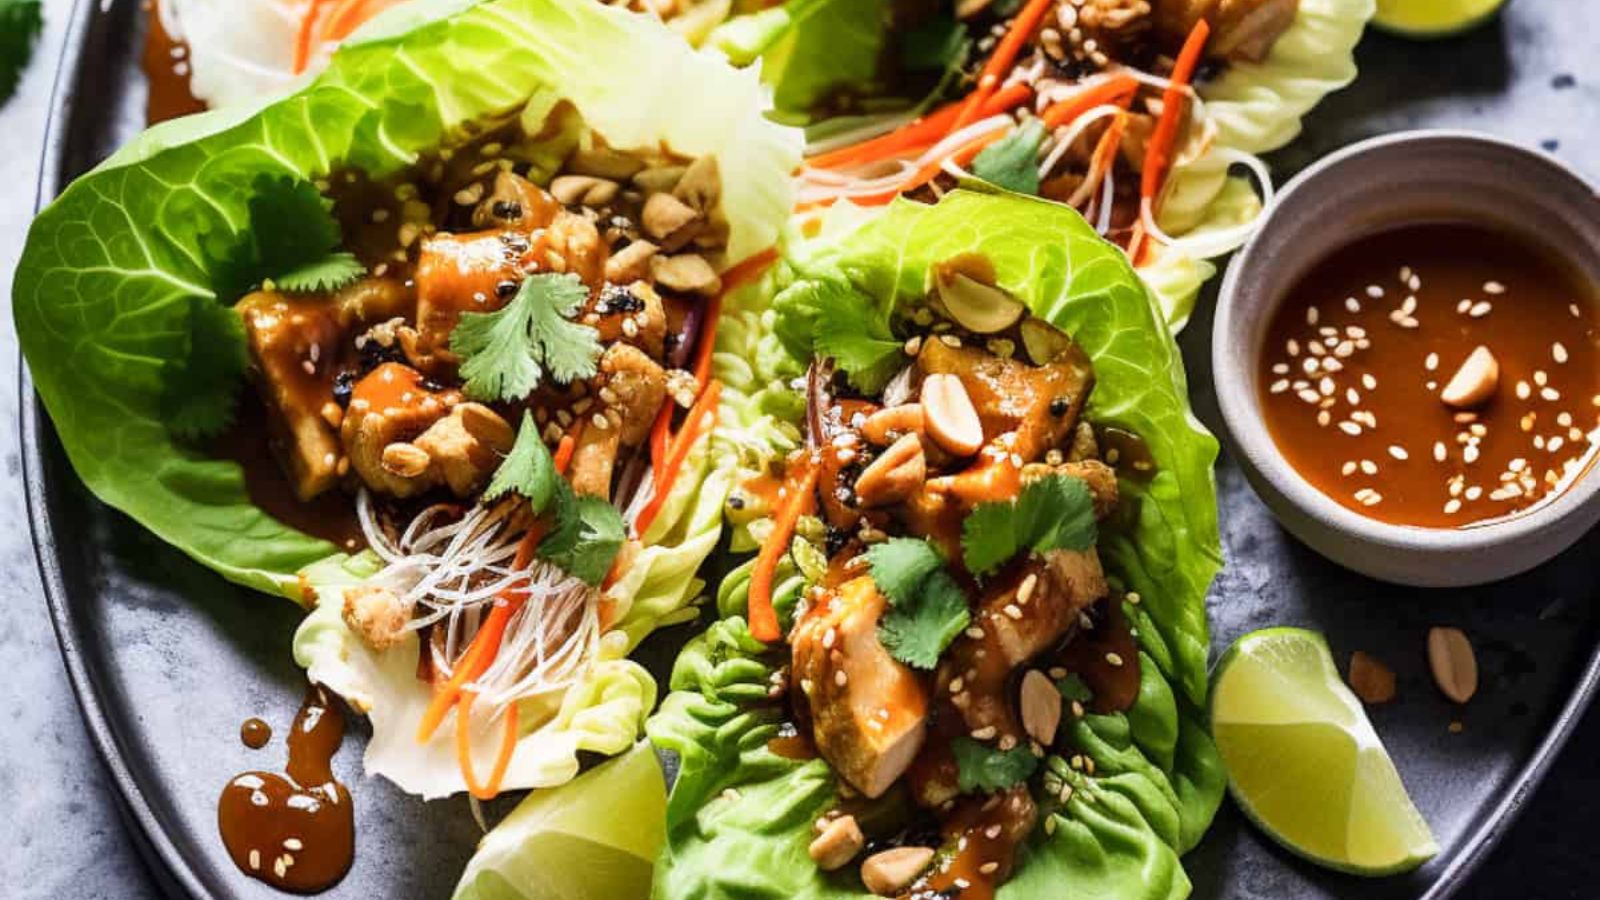 <p>Welcome to a recipe that’s guaranteed to transform your weeknight dinners: our Chicken Lettuce Wraps. These wraps are your ticket to a quick, easy, and healthy meal, boasting flavors that rival even P.F. Chang’s celebrated version. Imagine a crunch of fresh lettuce, a juicy burst of ground chicken, and a tangy sauce that ties everything together brilliantly.</p><p><strong>Recipe: <a href="https://savvybites.co.uk/chicken-lettuce-wraps/">chicken lettuce wraps</a></strong></p>